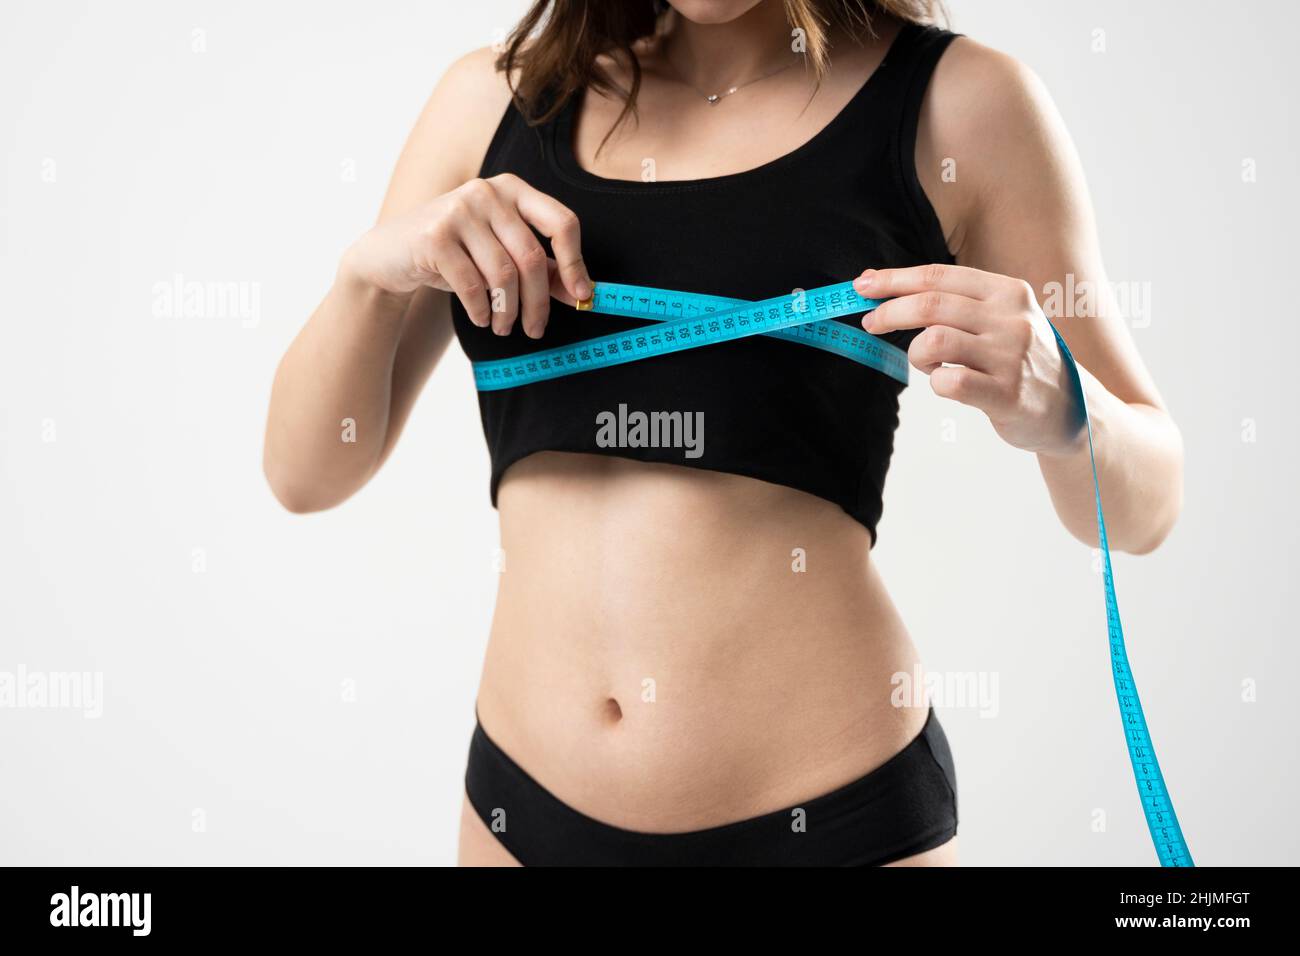 The Girl Taking Measurements Of Her Body White Background Stock Photo -  Download Image Now - iStock